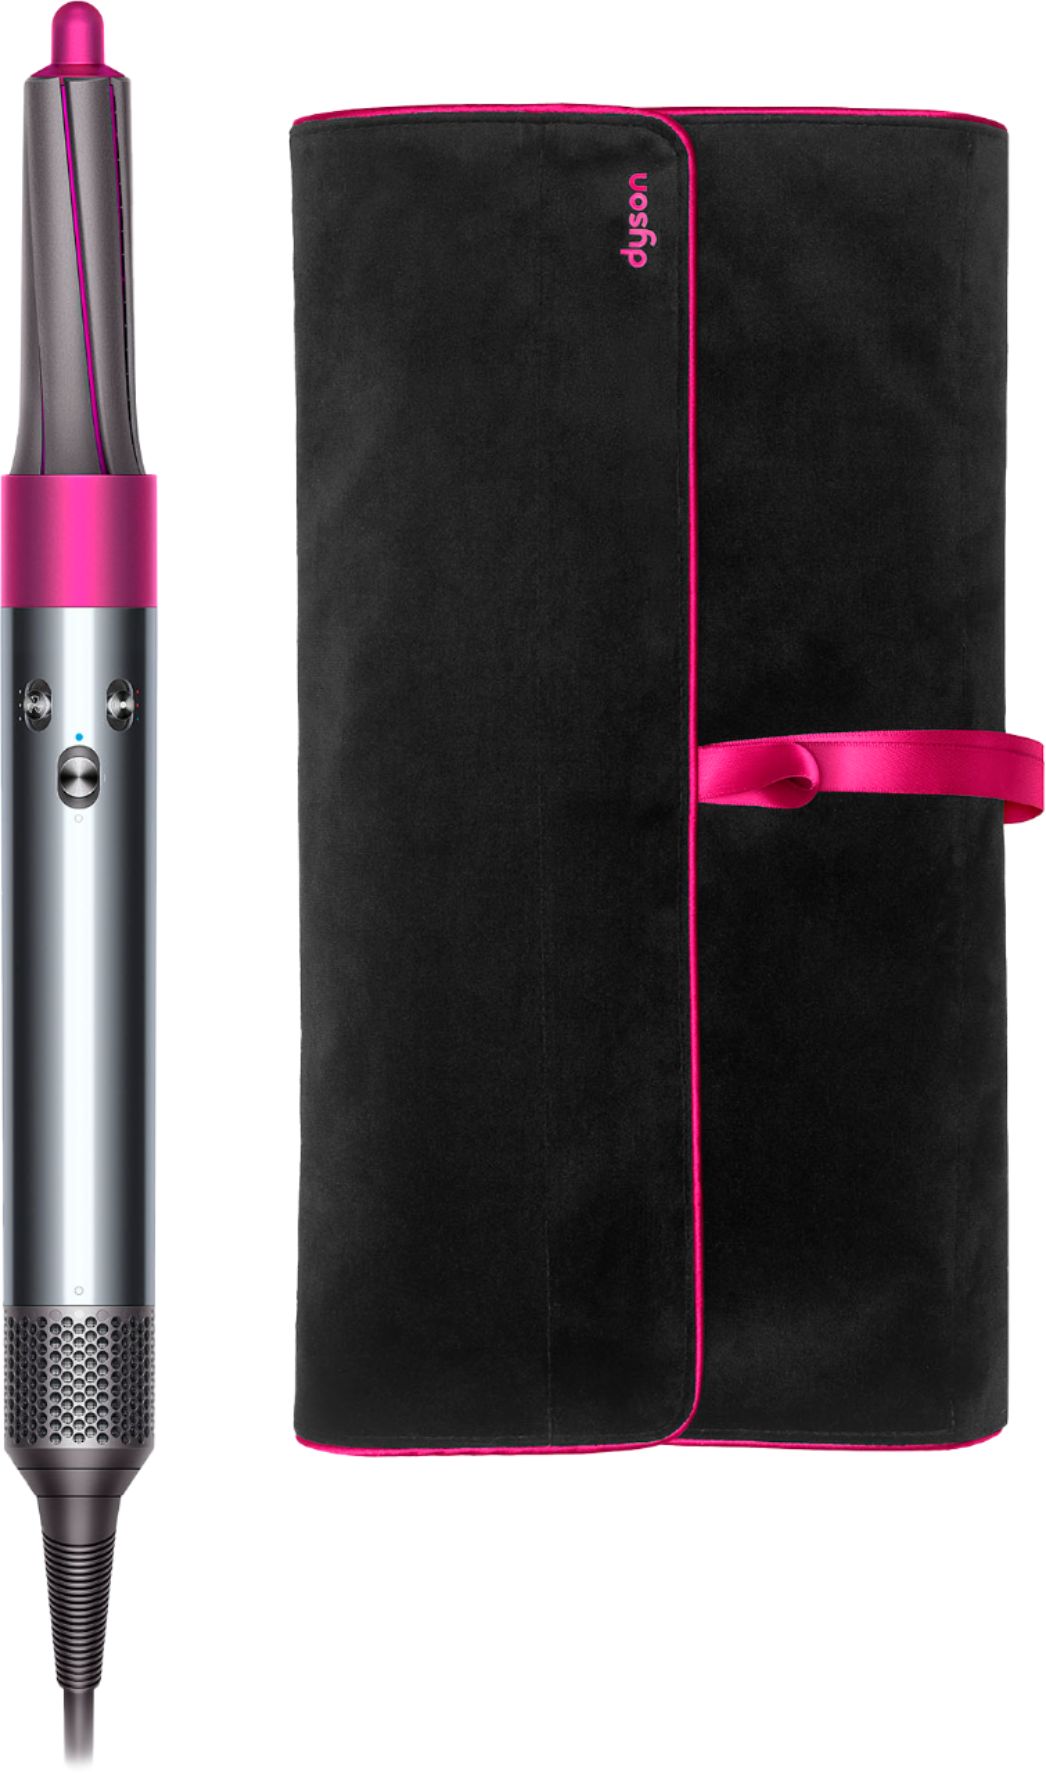 Angle View: Dyson - Airwrap styler gift edition - Nickel/Fuchsia